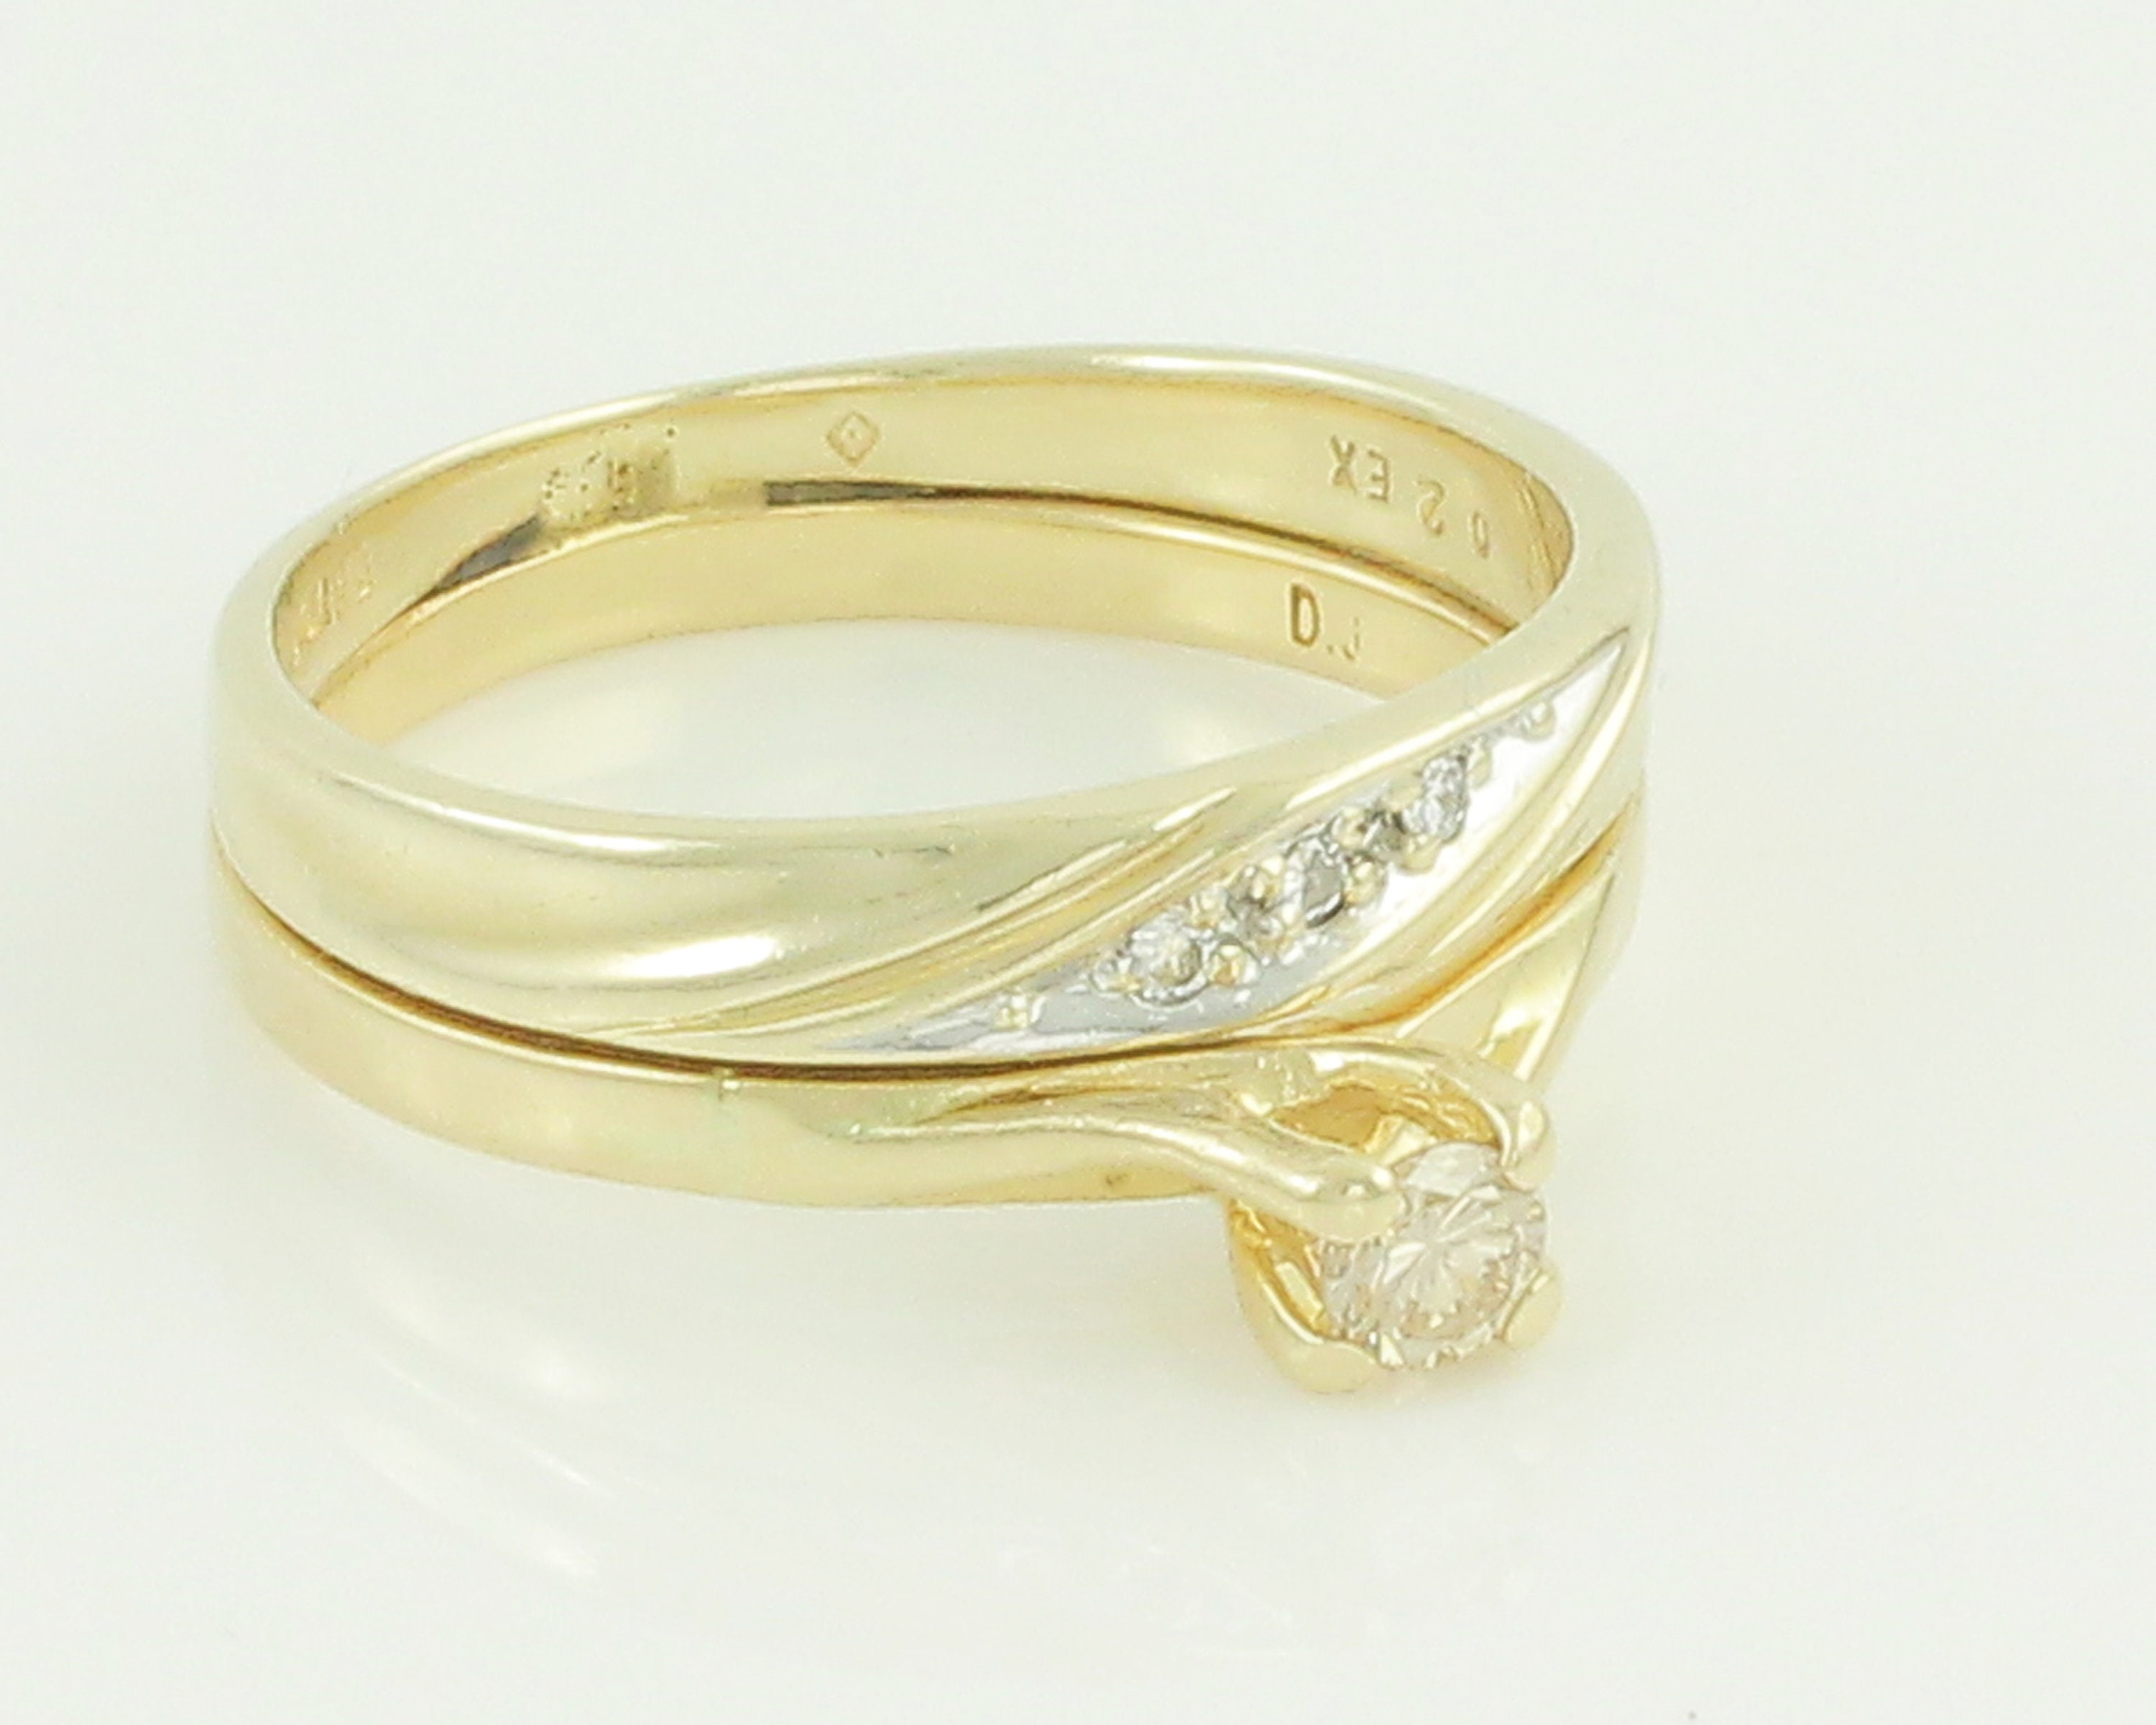 How Many Grams of Gold Are in an Engagement Ring?